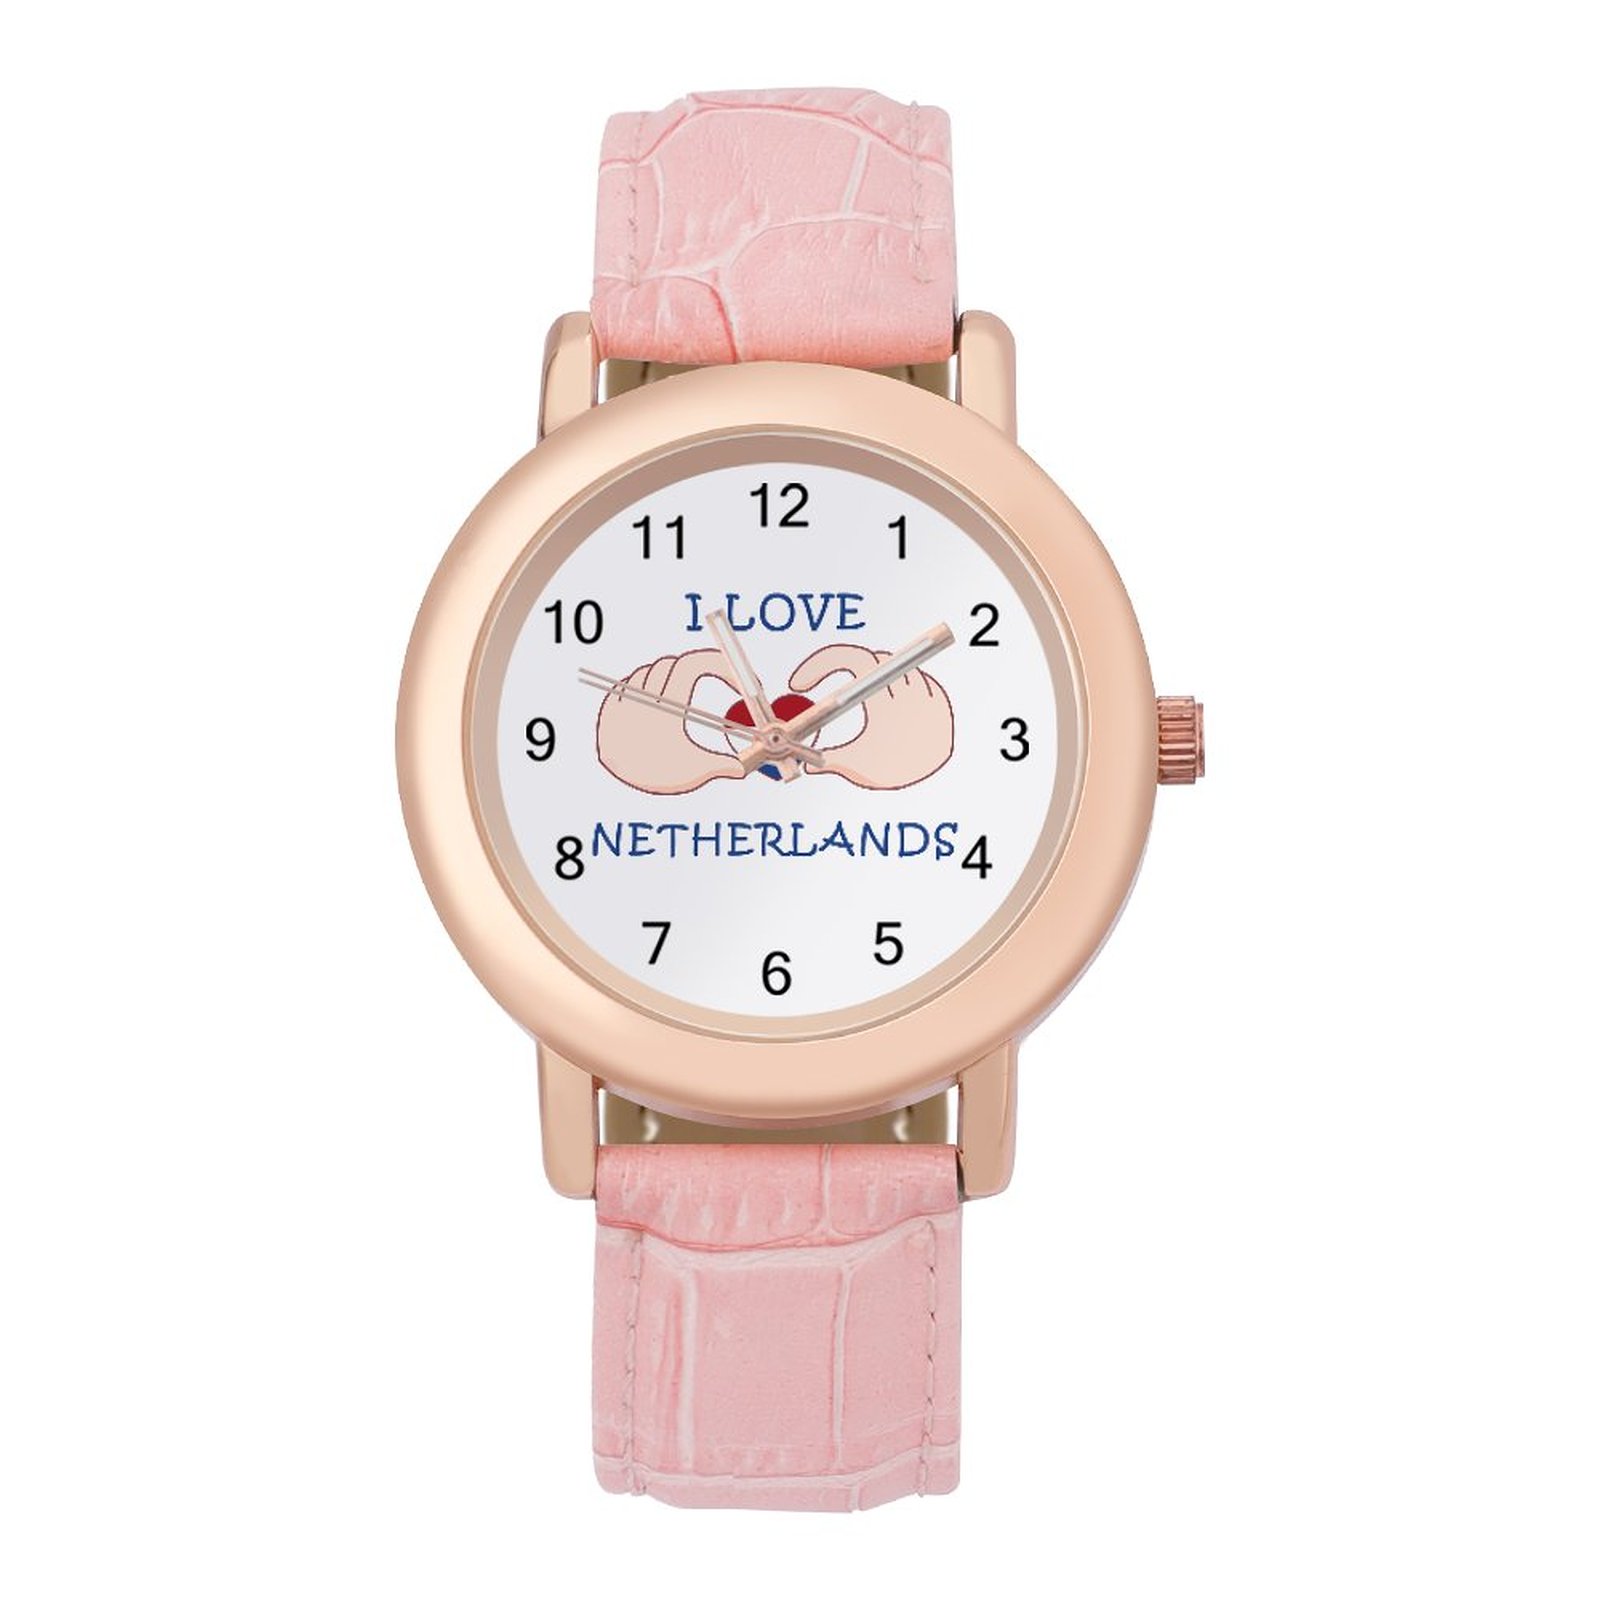 I Love Netherlands Women's Leather Strap Fashion Watches